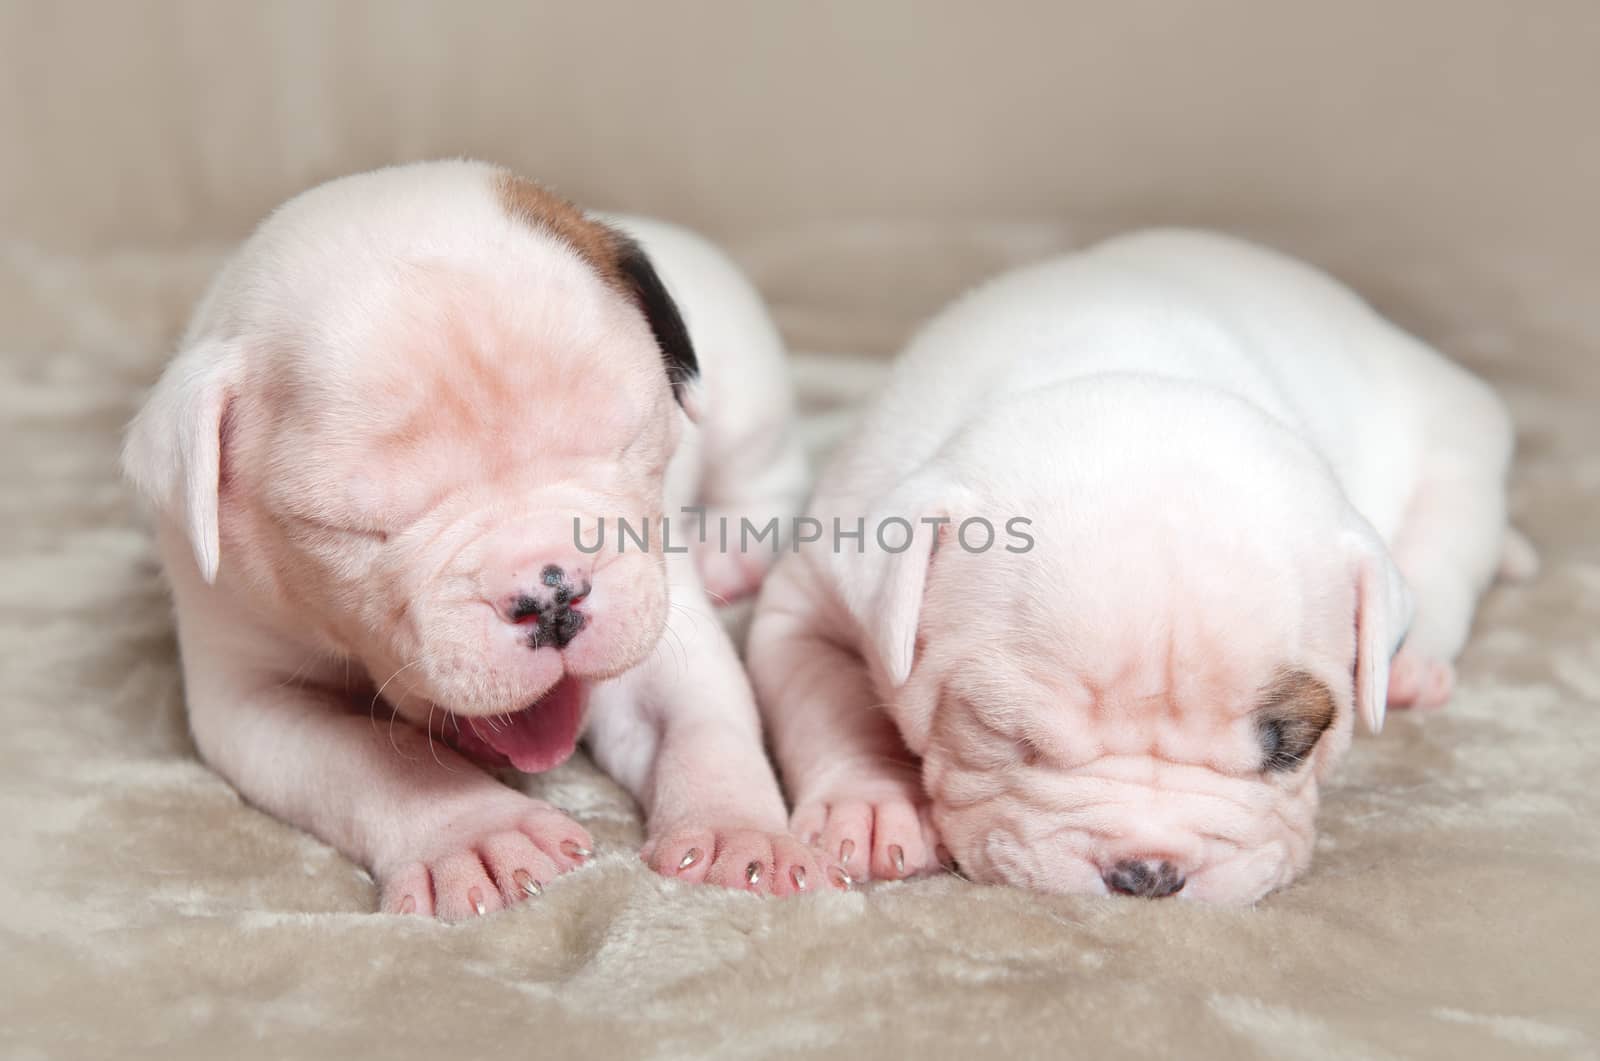 Two funny small American Bulldog puppies dogs on light background. The puppies are sleeping